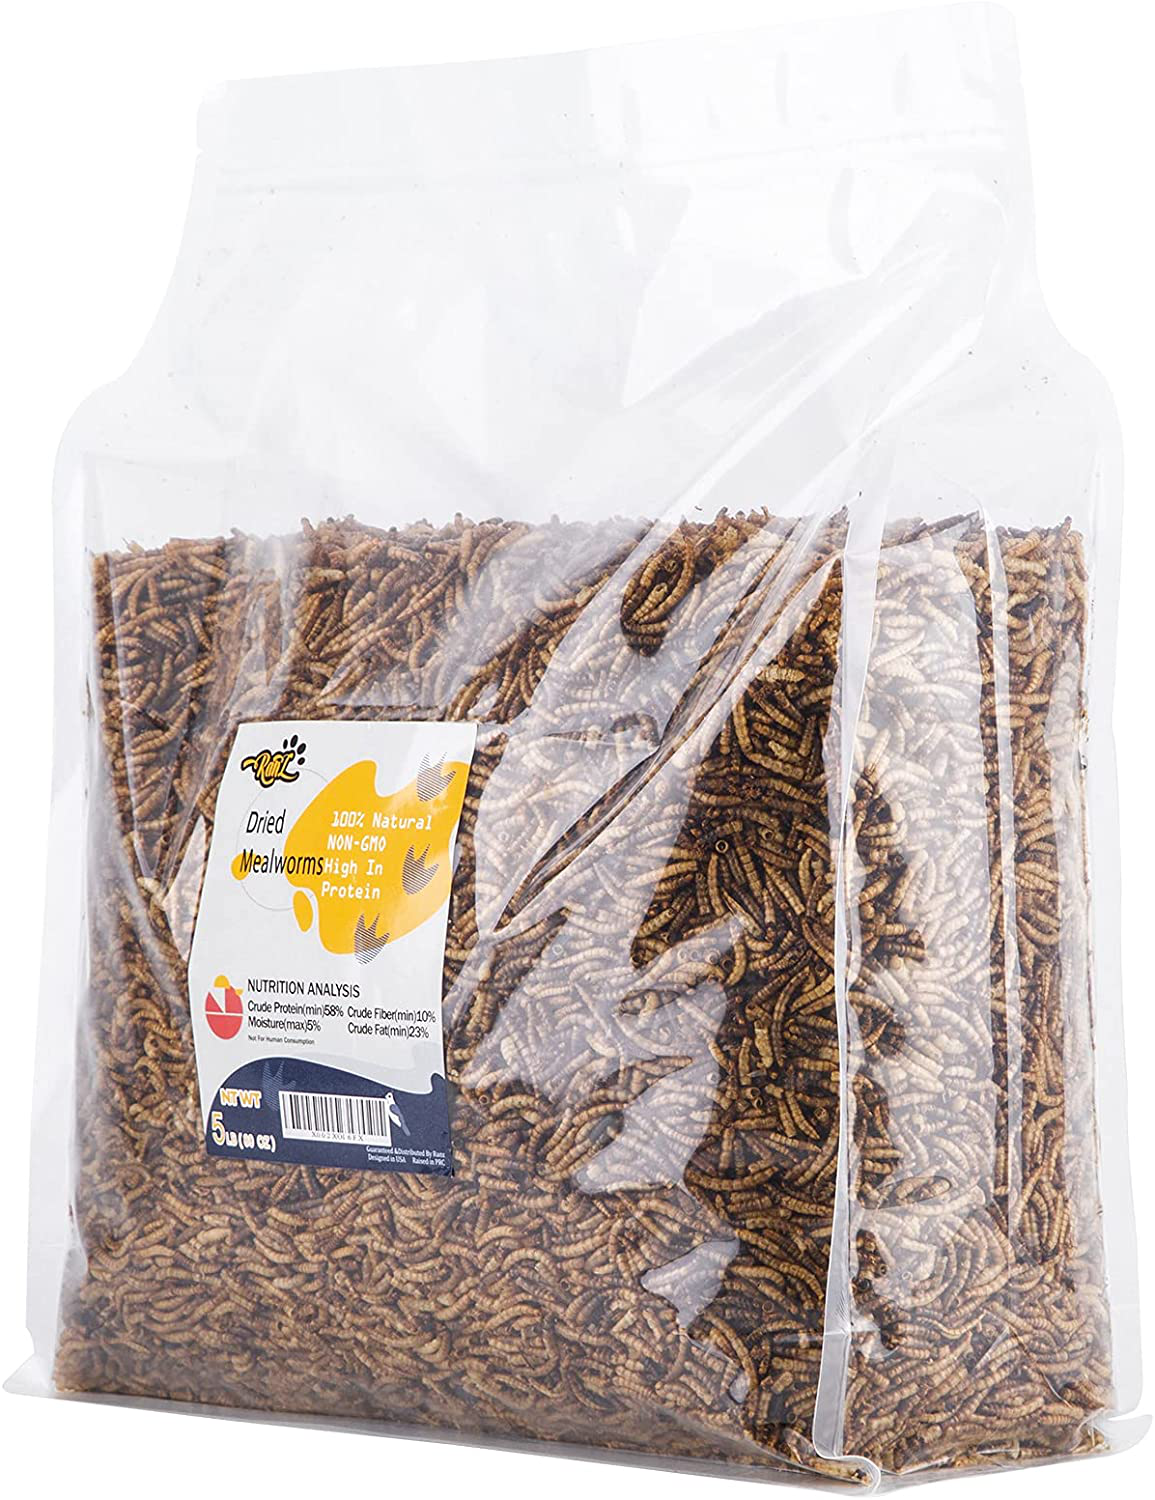 RANZ 5LB & 10LB Non-Gmo Dried Mealworms for Chicken Feed, High Protein Mealworm Treats, Best for Wild Birds, Ducks, Hens, Fish, Reptiles & Amphibian.